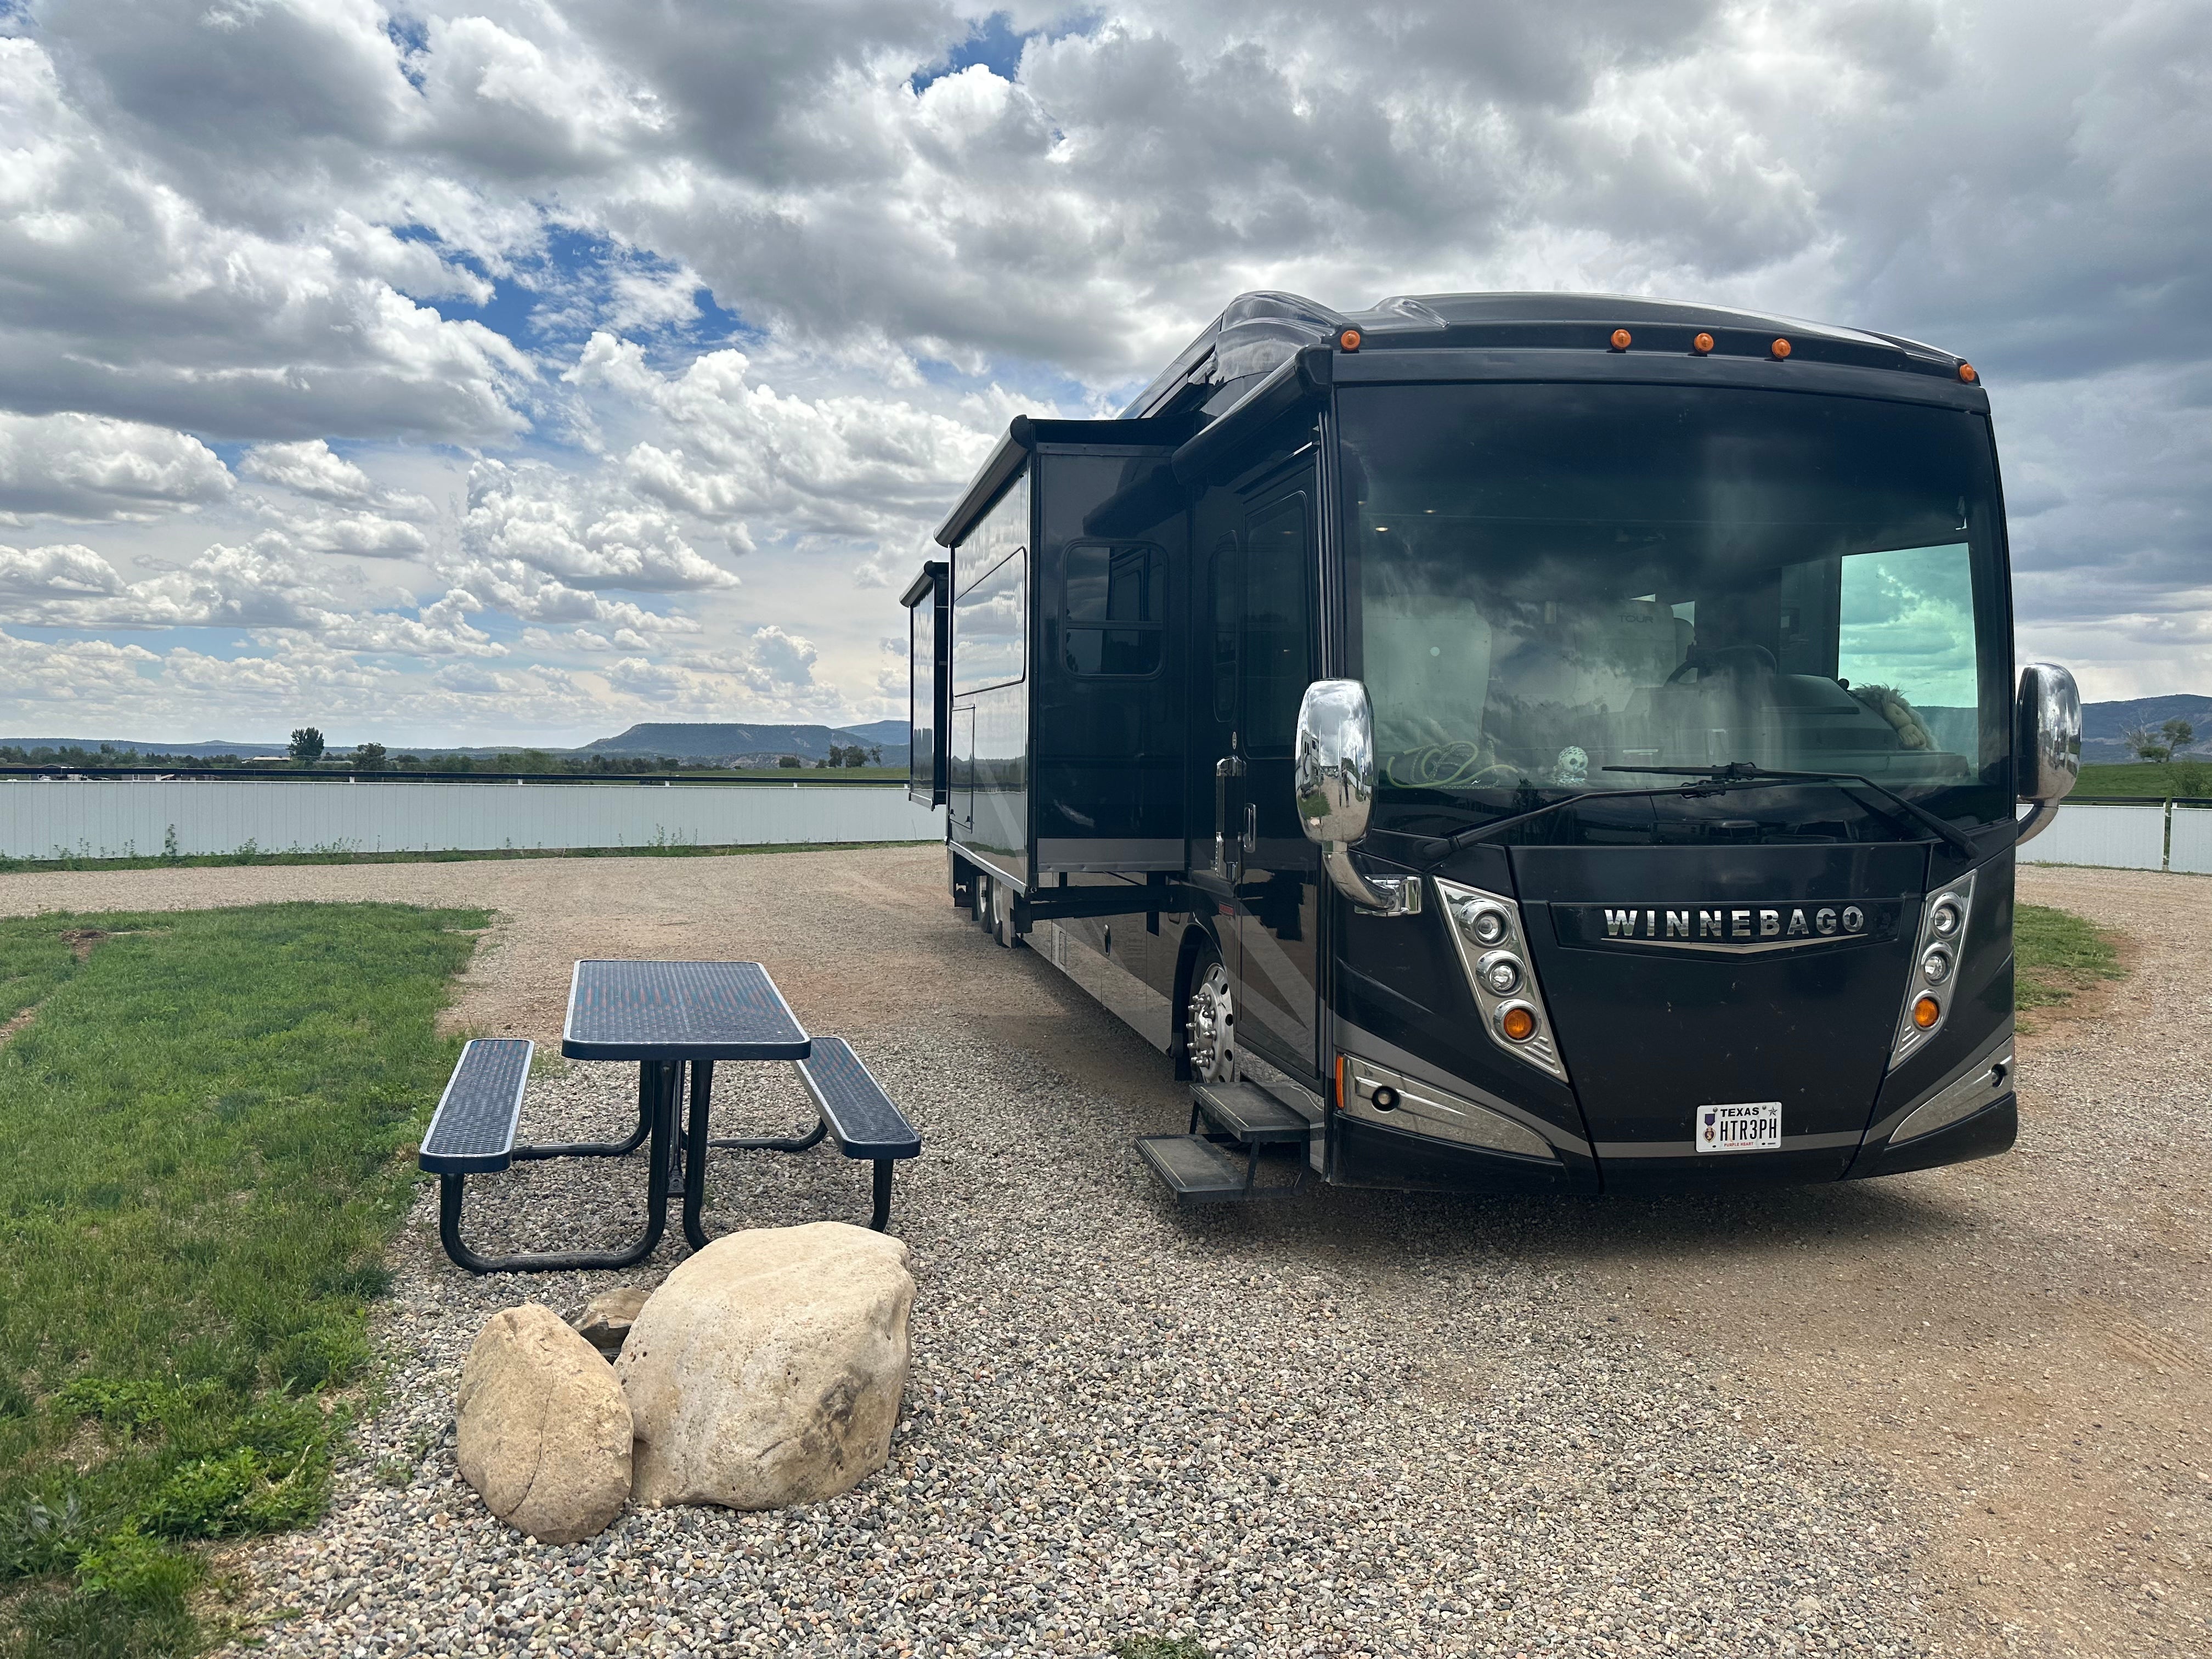 Camper submitted image from Durango Ranch RV Resort - 3